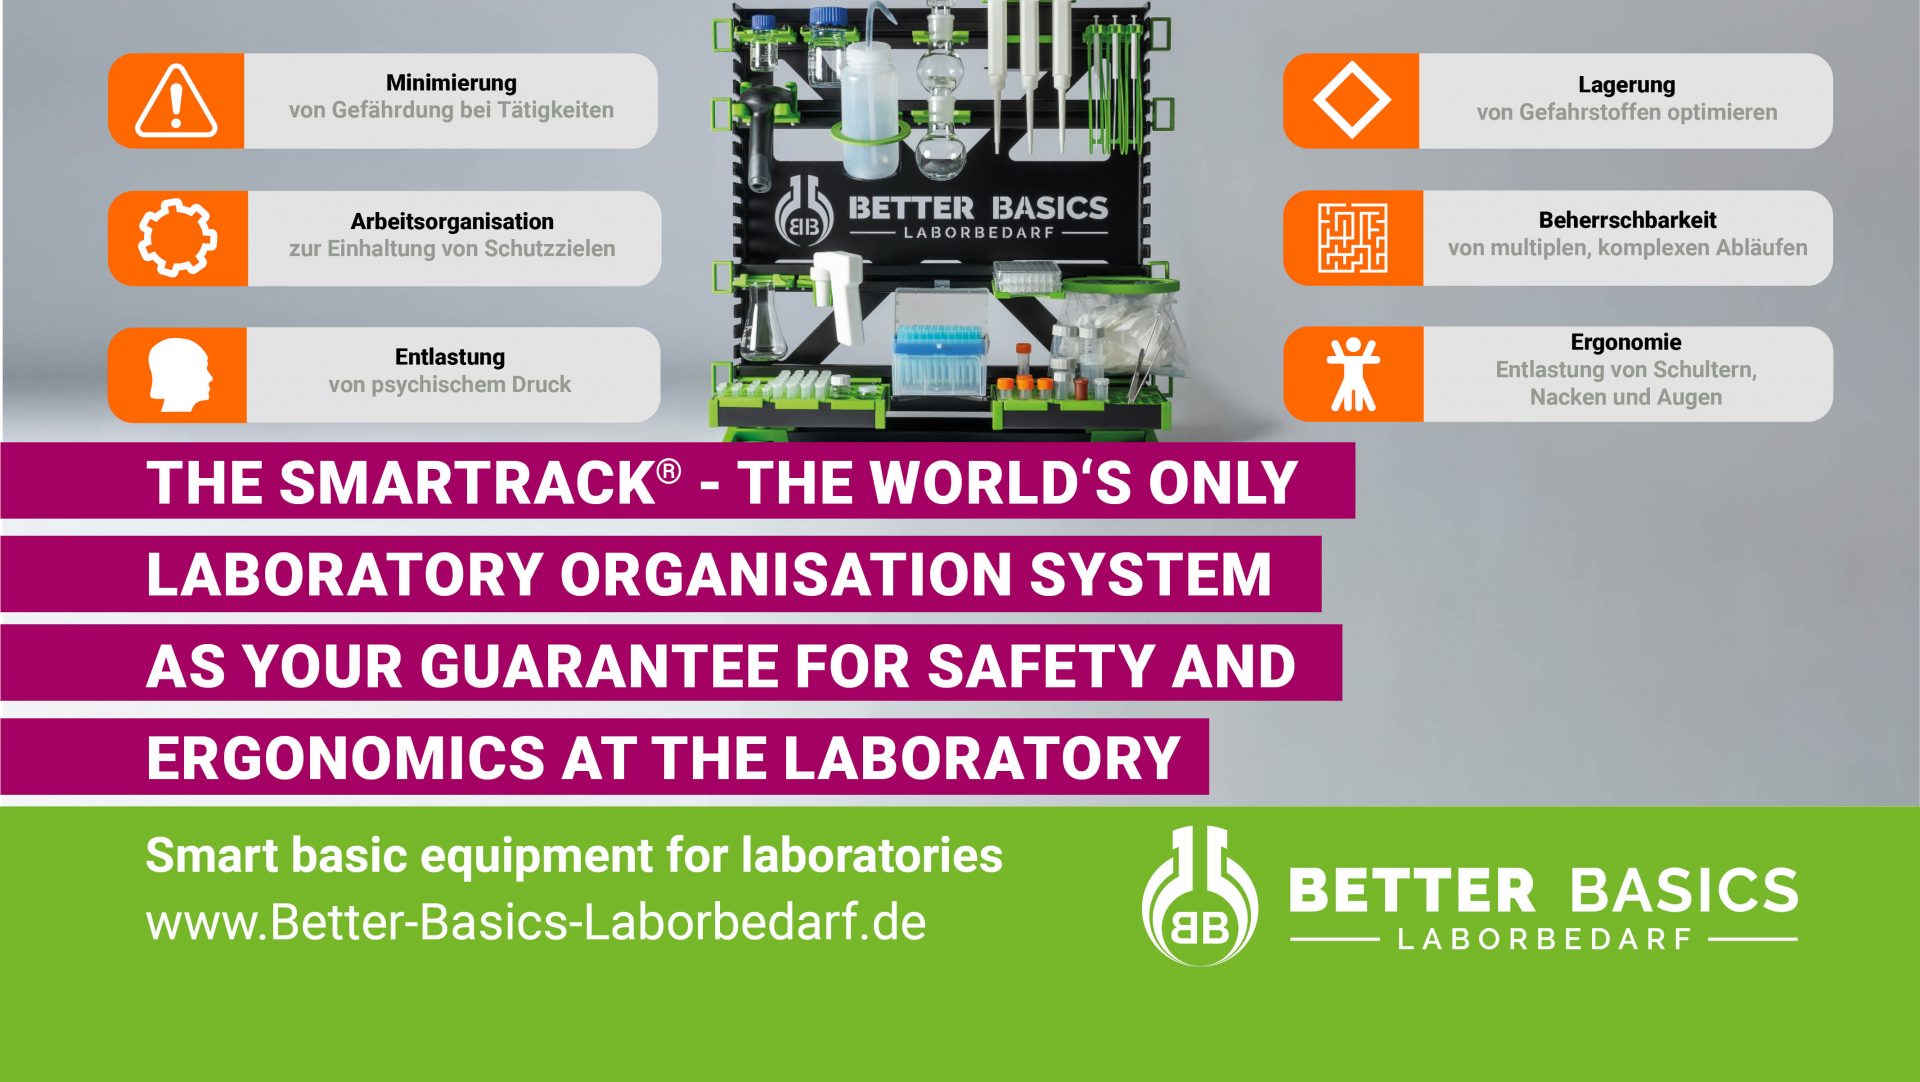 The SmartRack® - The world's only laboratory organisation system as your guarantee for safety and ergonomics at the laboratory workplace